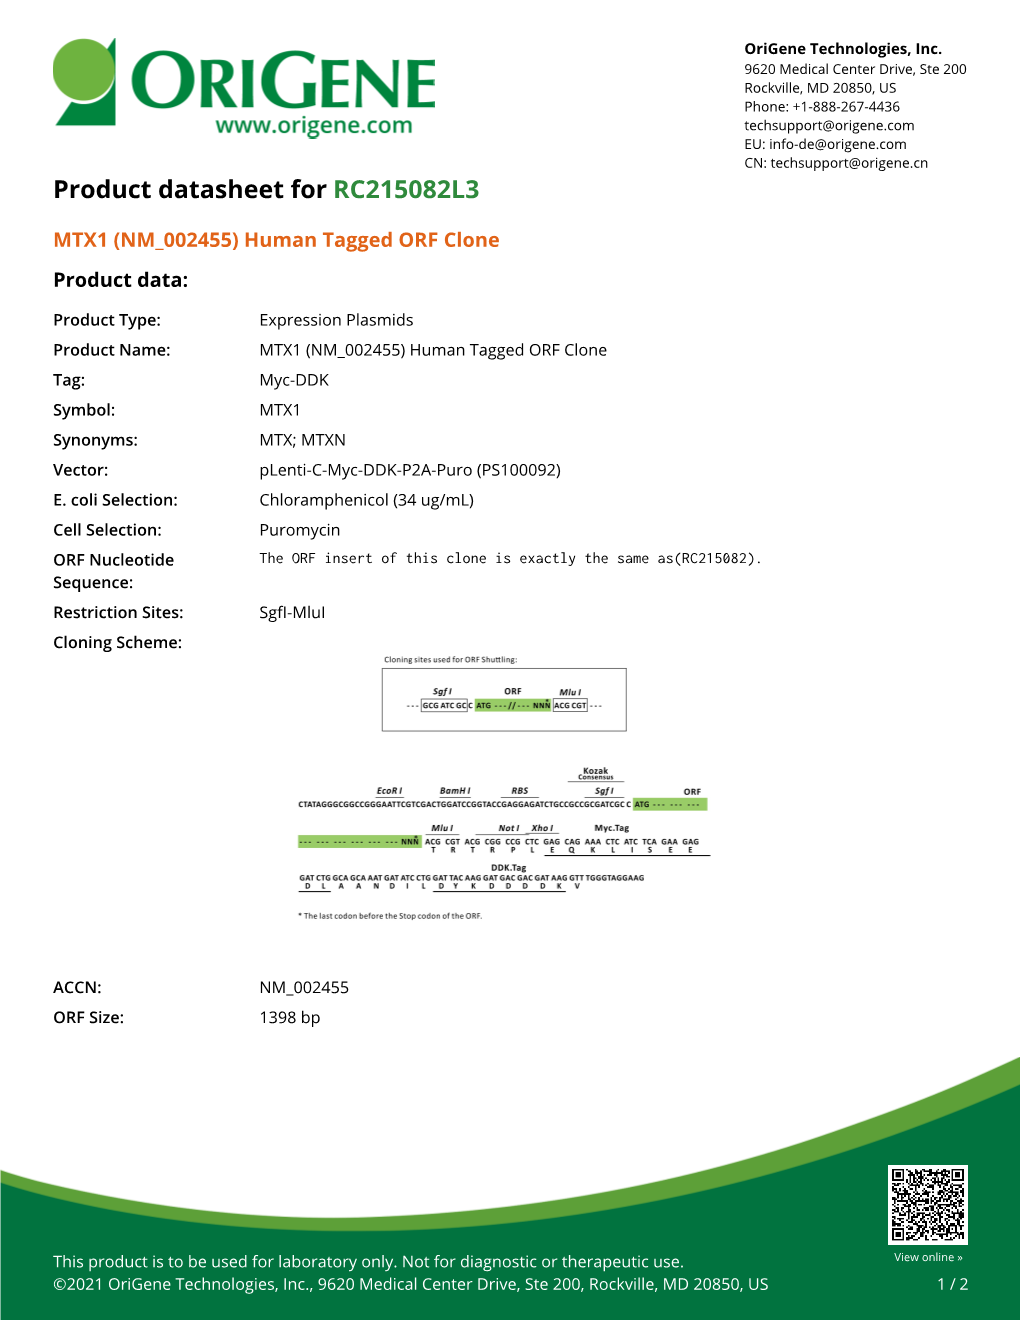 MTX1 (NM 002455) Human Tagged ORF Clone Product Data